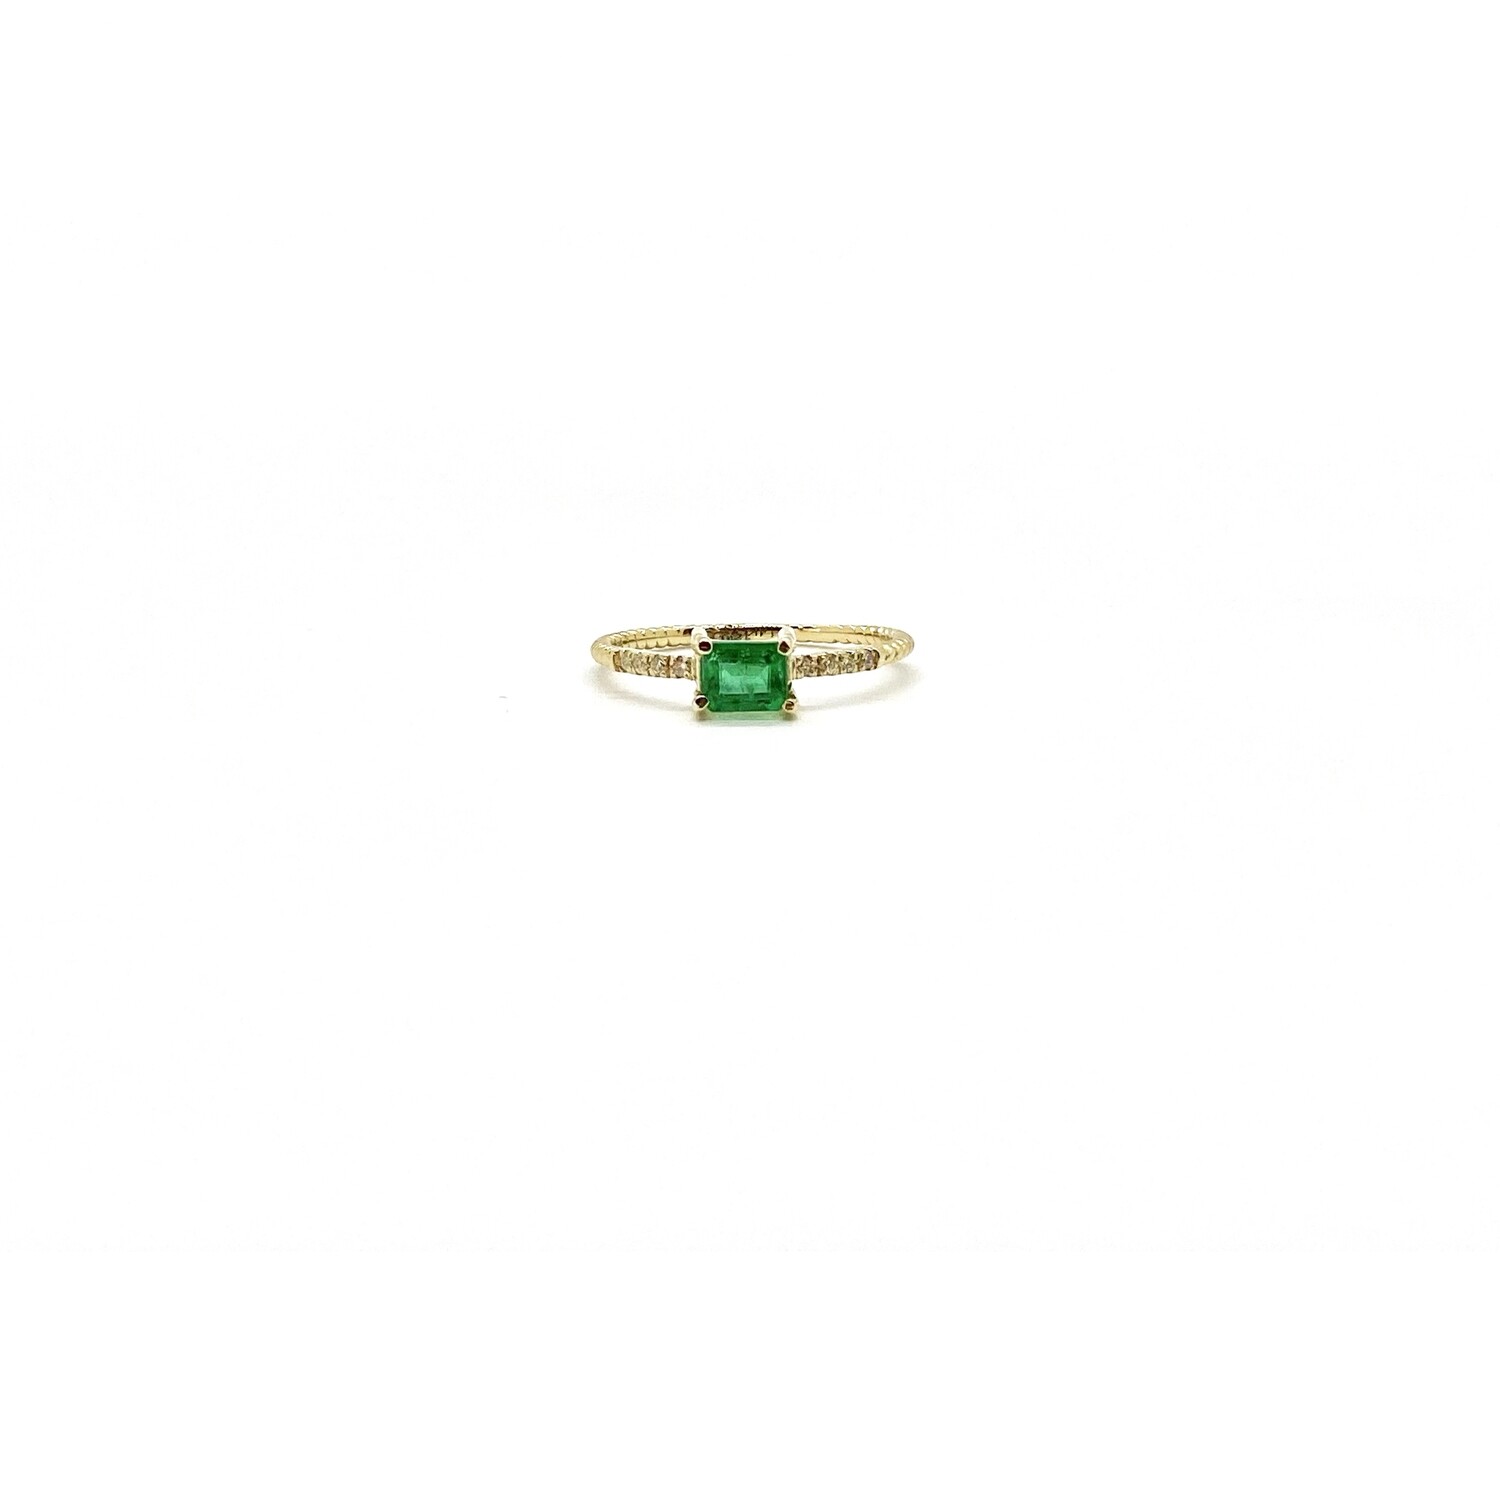 THE EMERALD RING